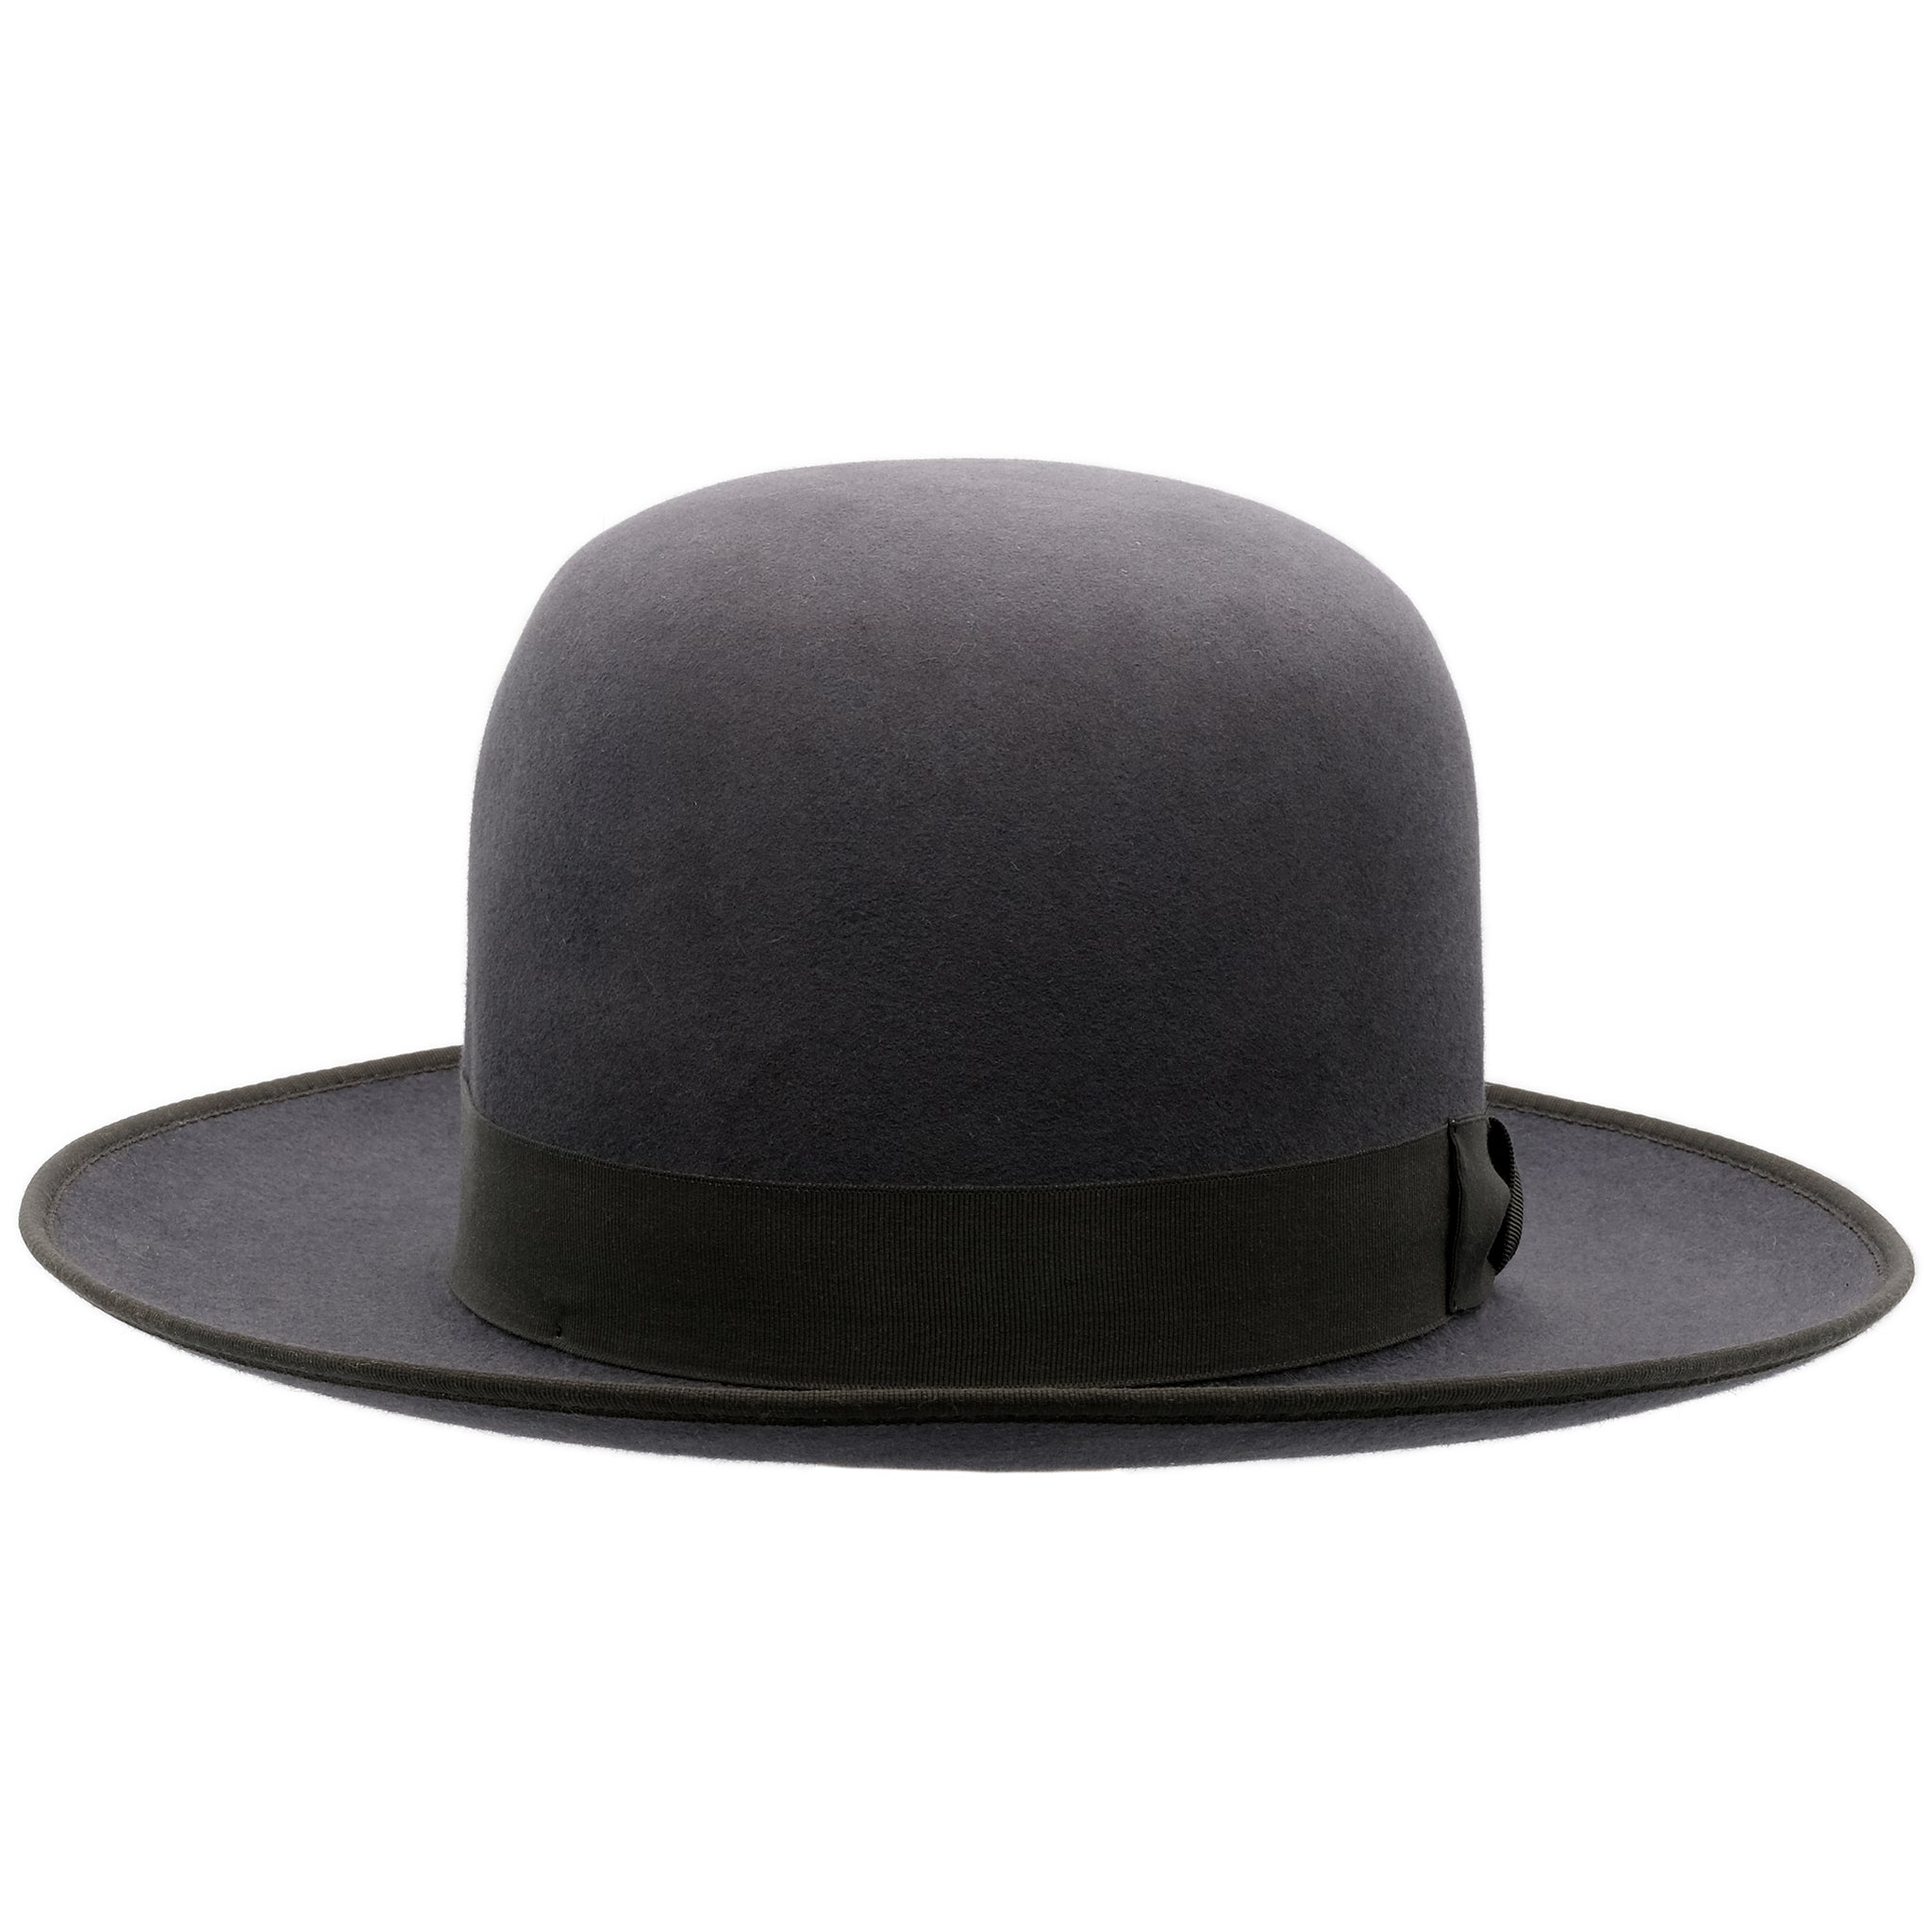 Front-on view of Akubra Squatter hat in Carbon grey colour, shown with open crown